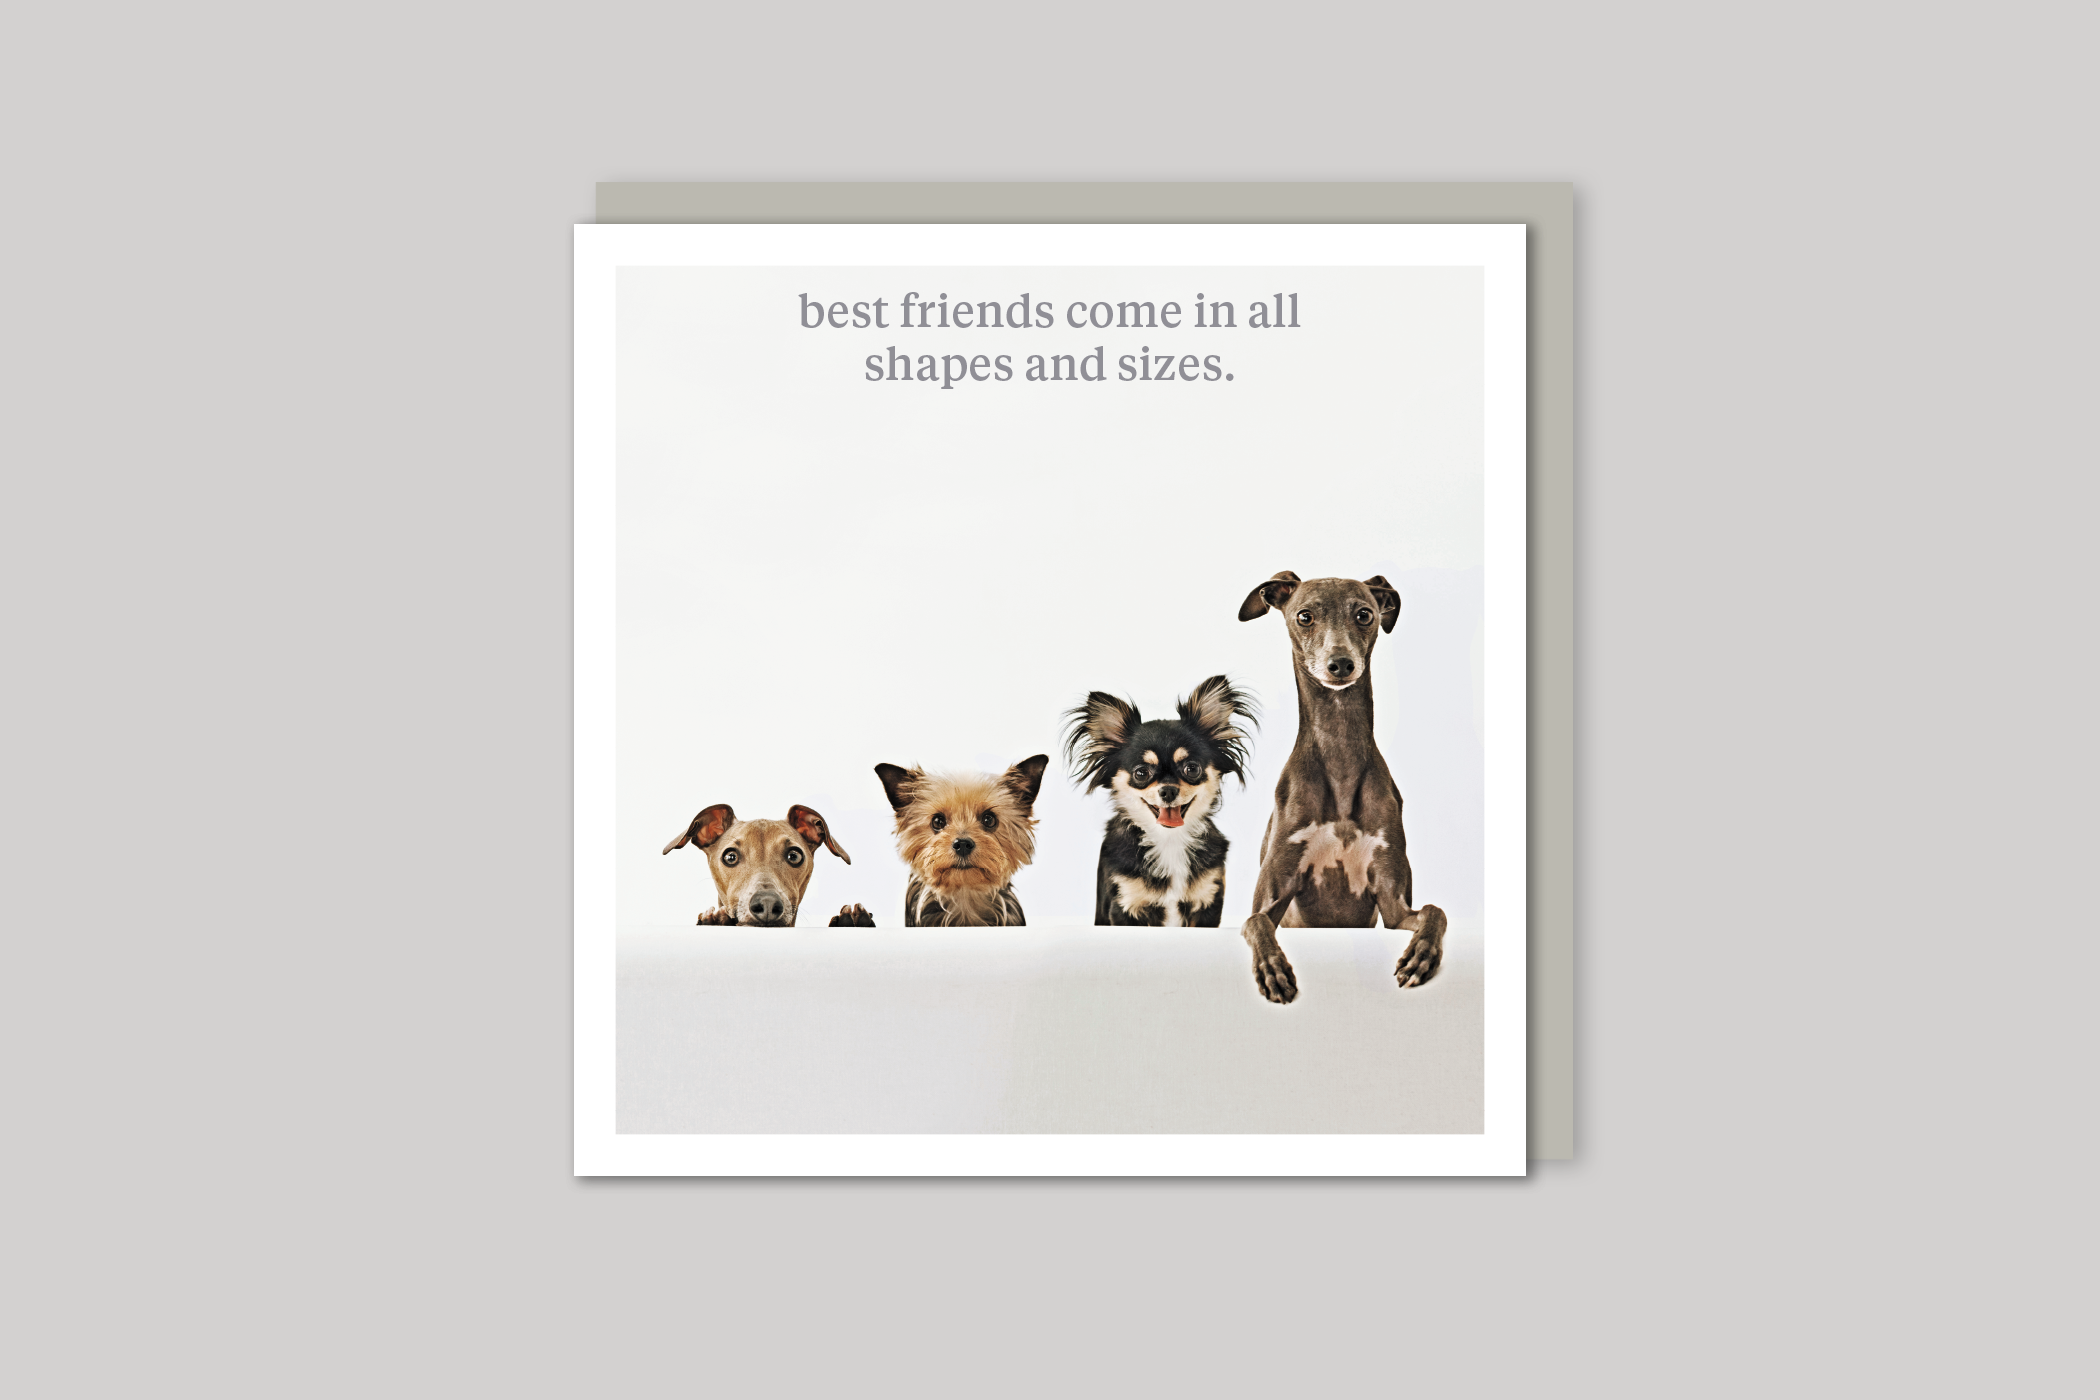 All Shapes and Sizes quirky animal portrait from Curious World range of greeting cards by Icon, back page.